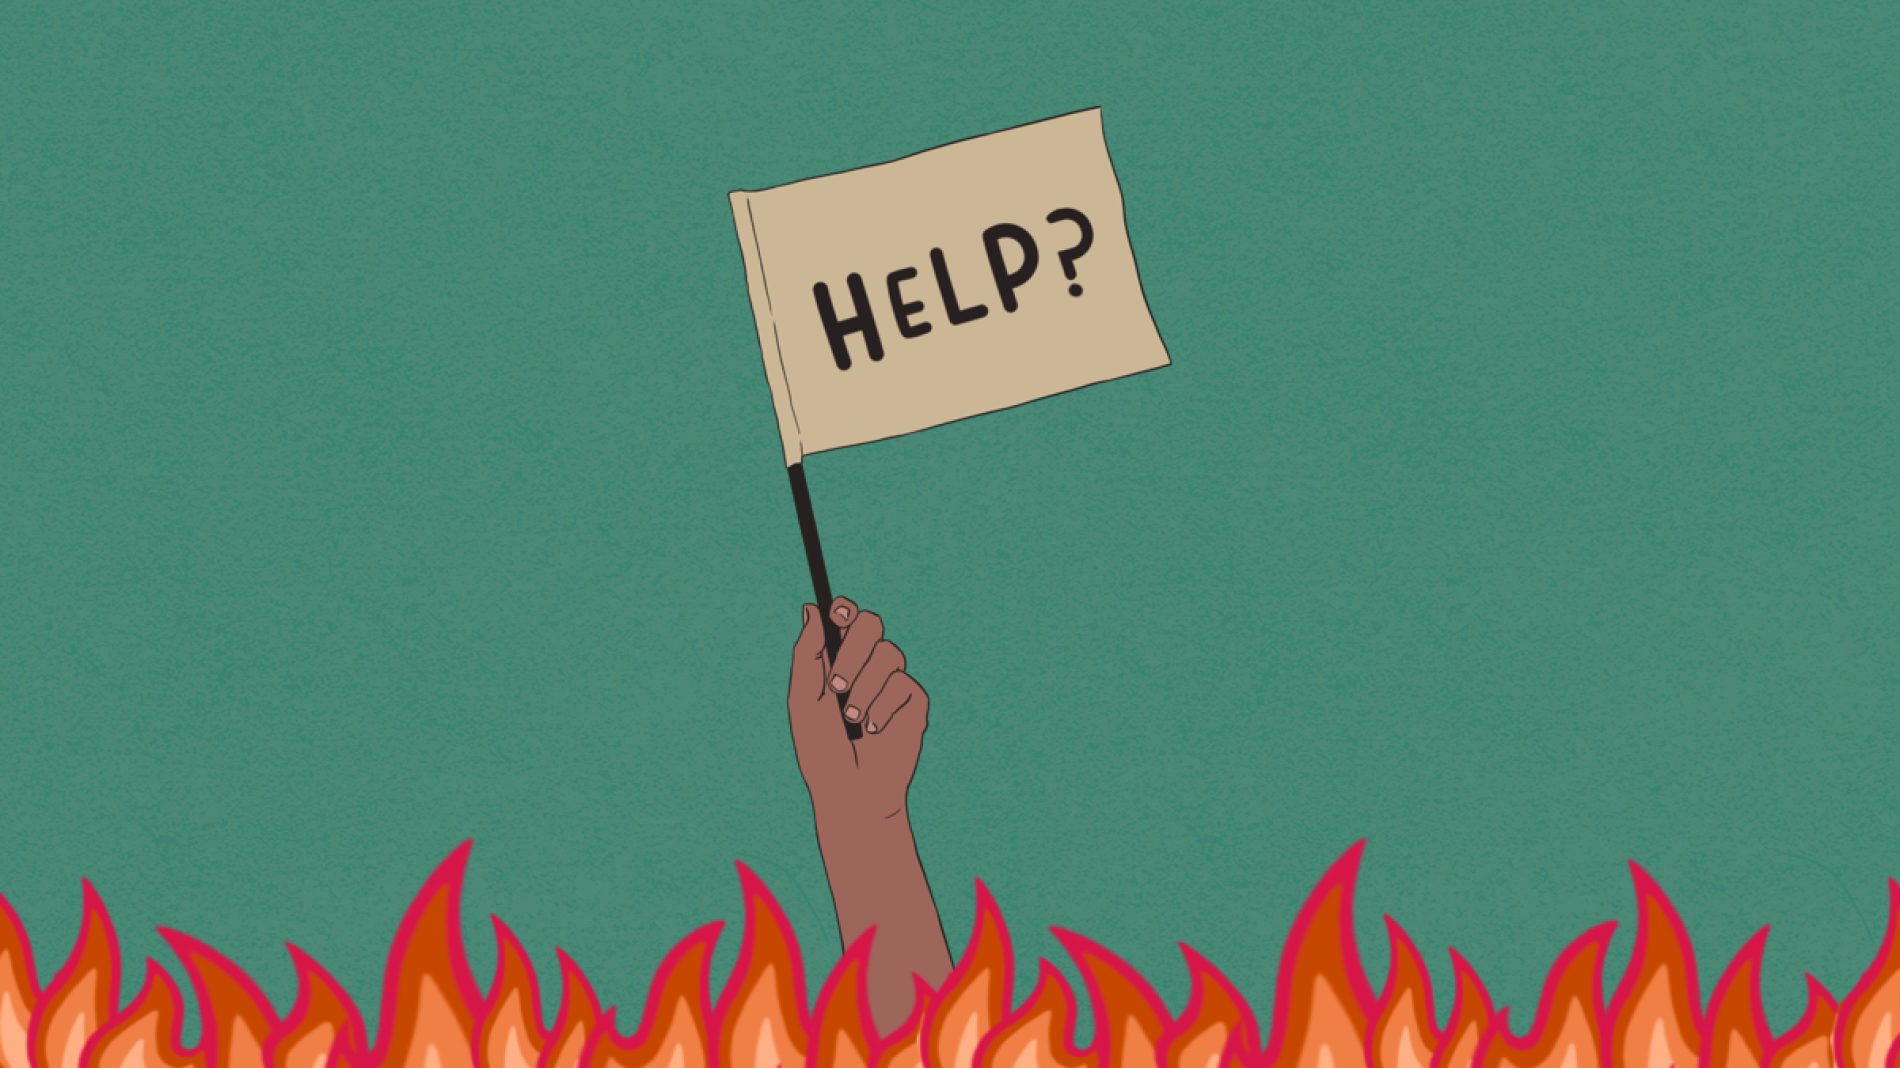 Illustration of a hand coming out of flames holding a sign that says help - burnout support